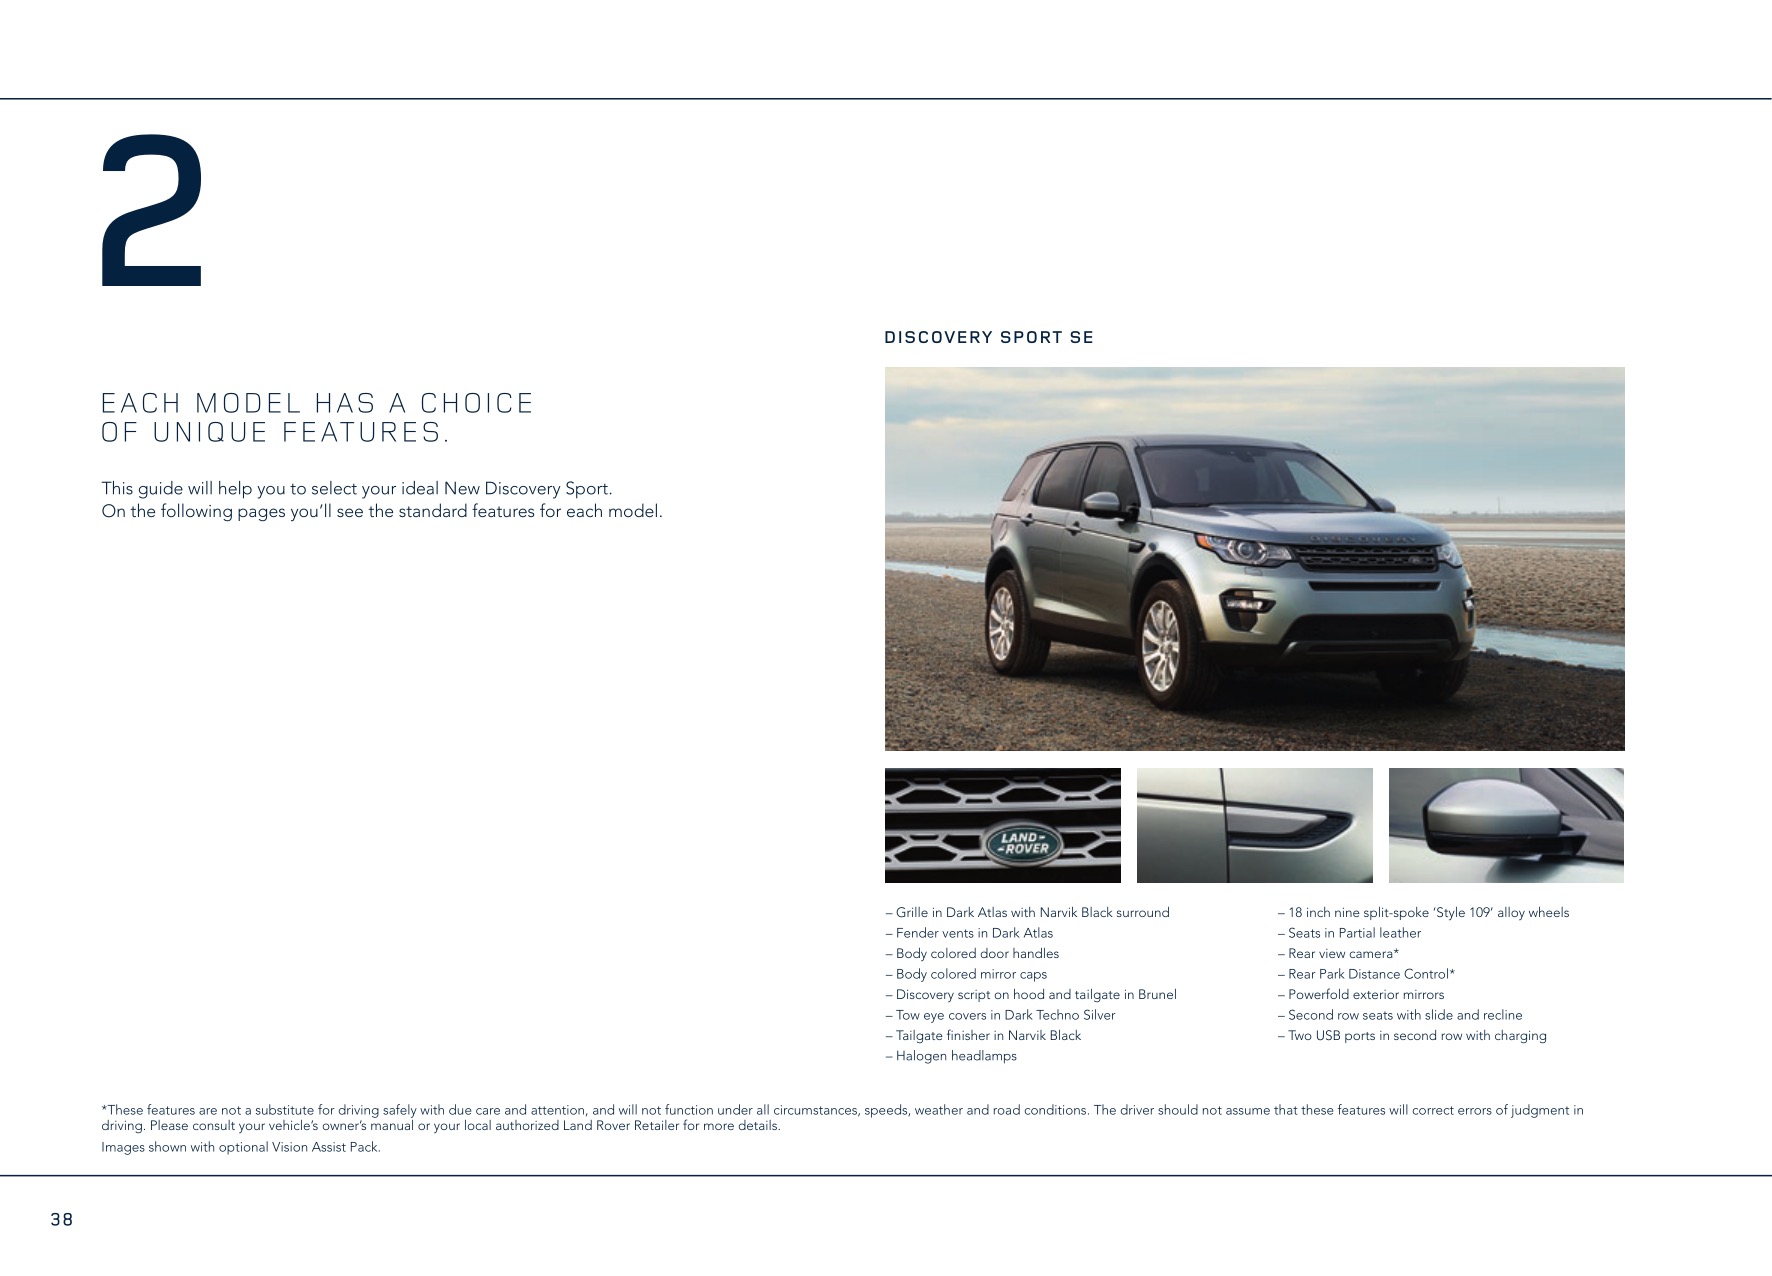 2016 Land Rover Discovery Sport Brochure Page 48